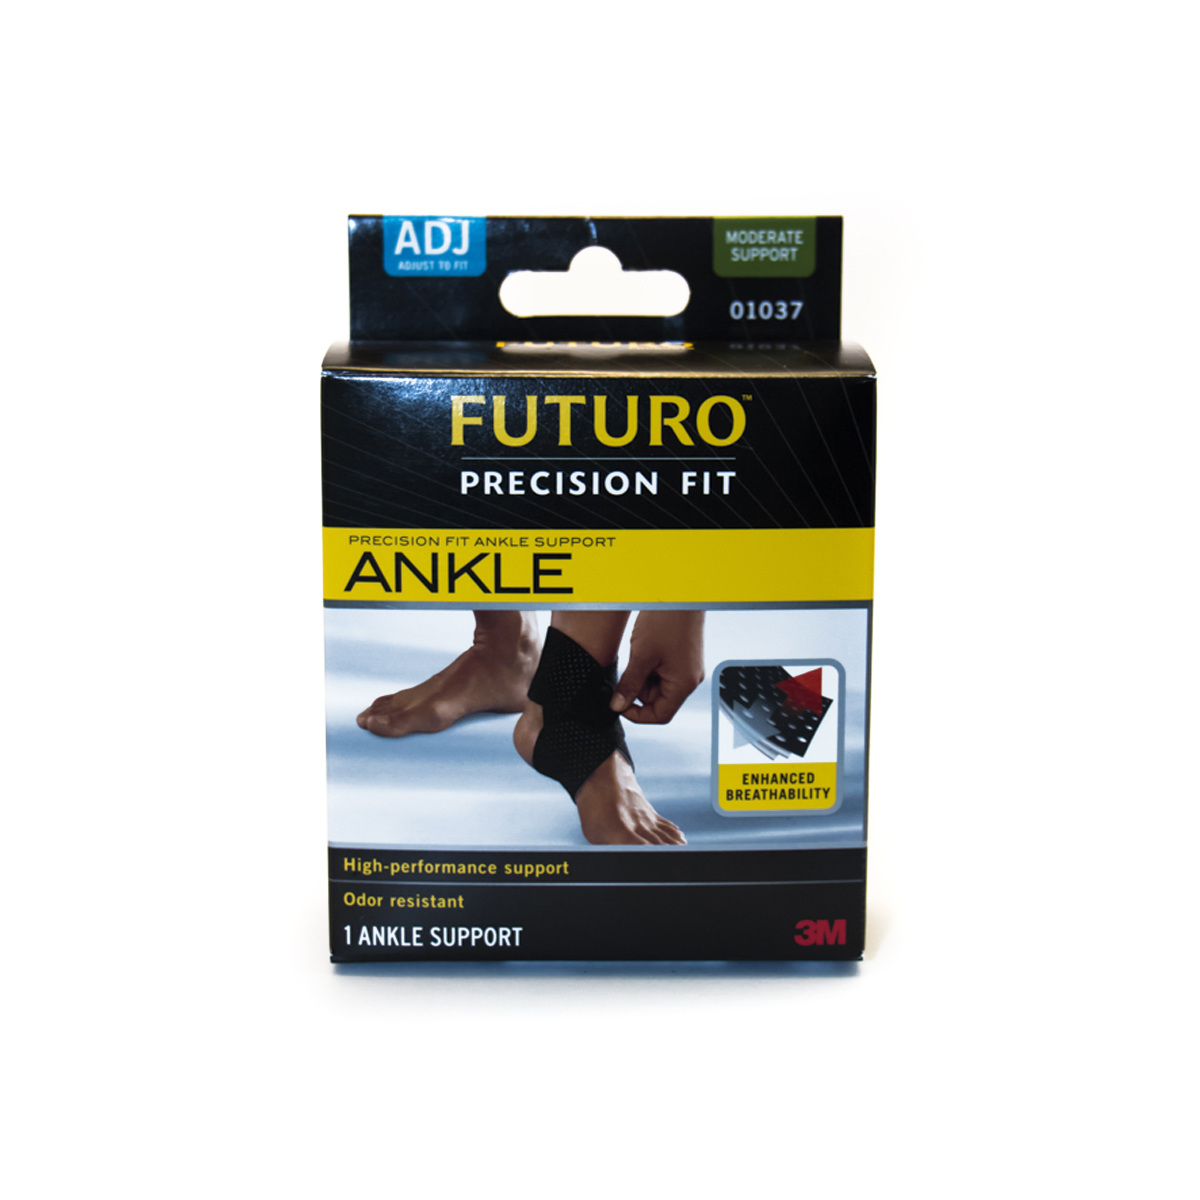 Futuro Precision Fit Adjustable Ankle Support - Royal Oak Pharmacy